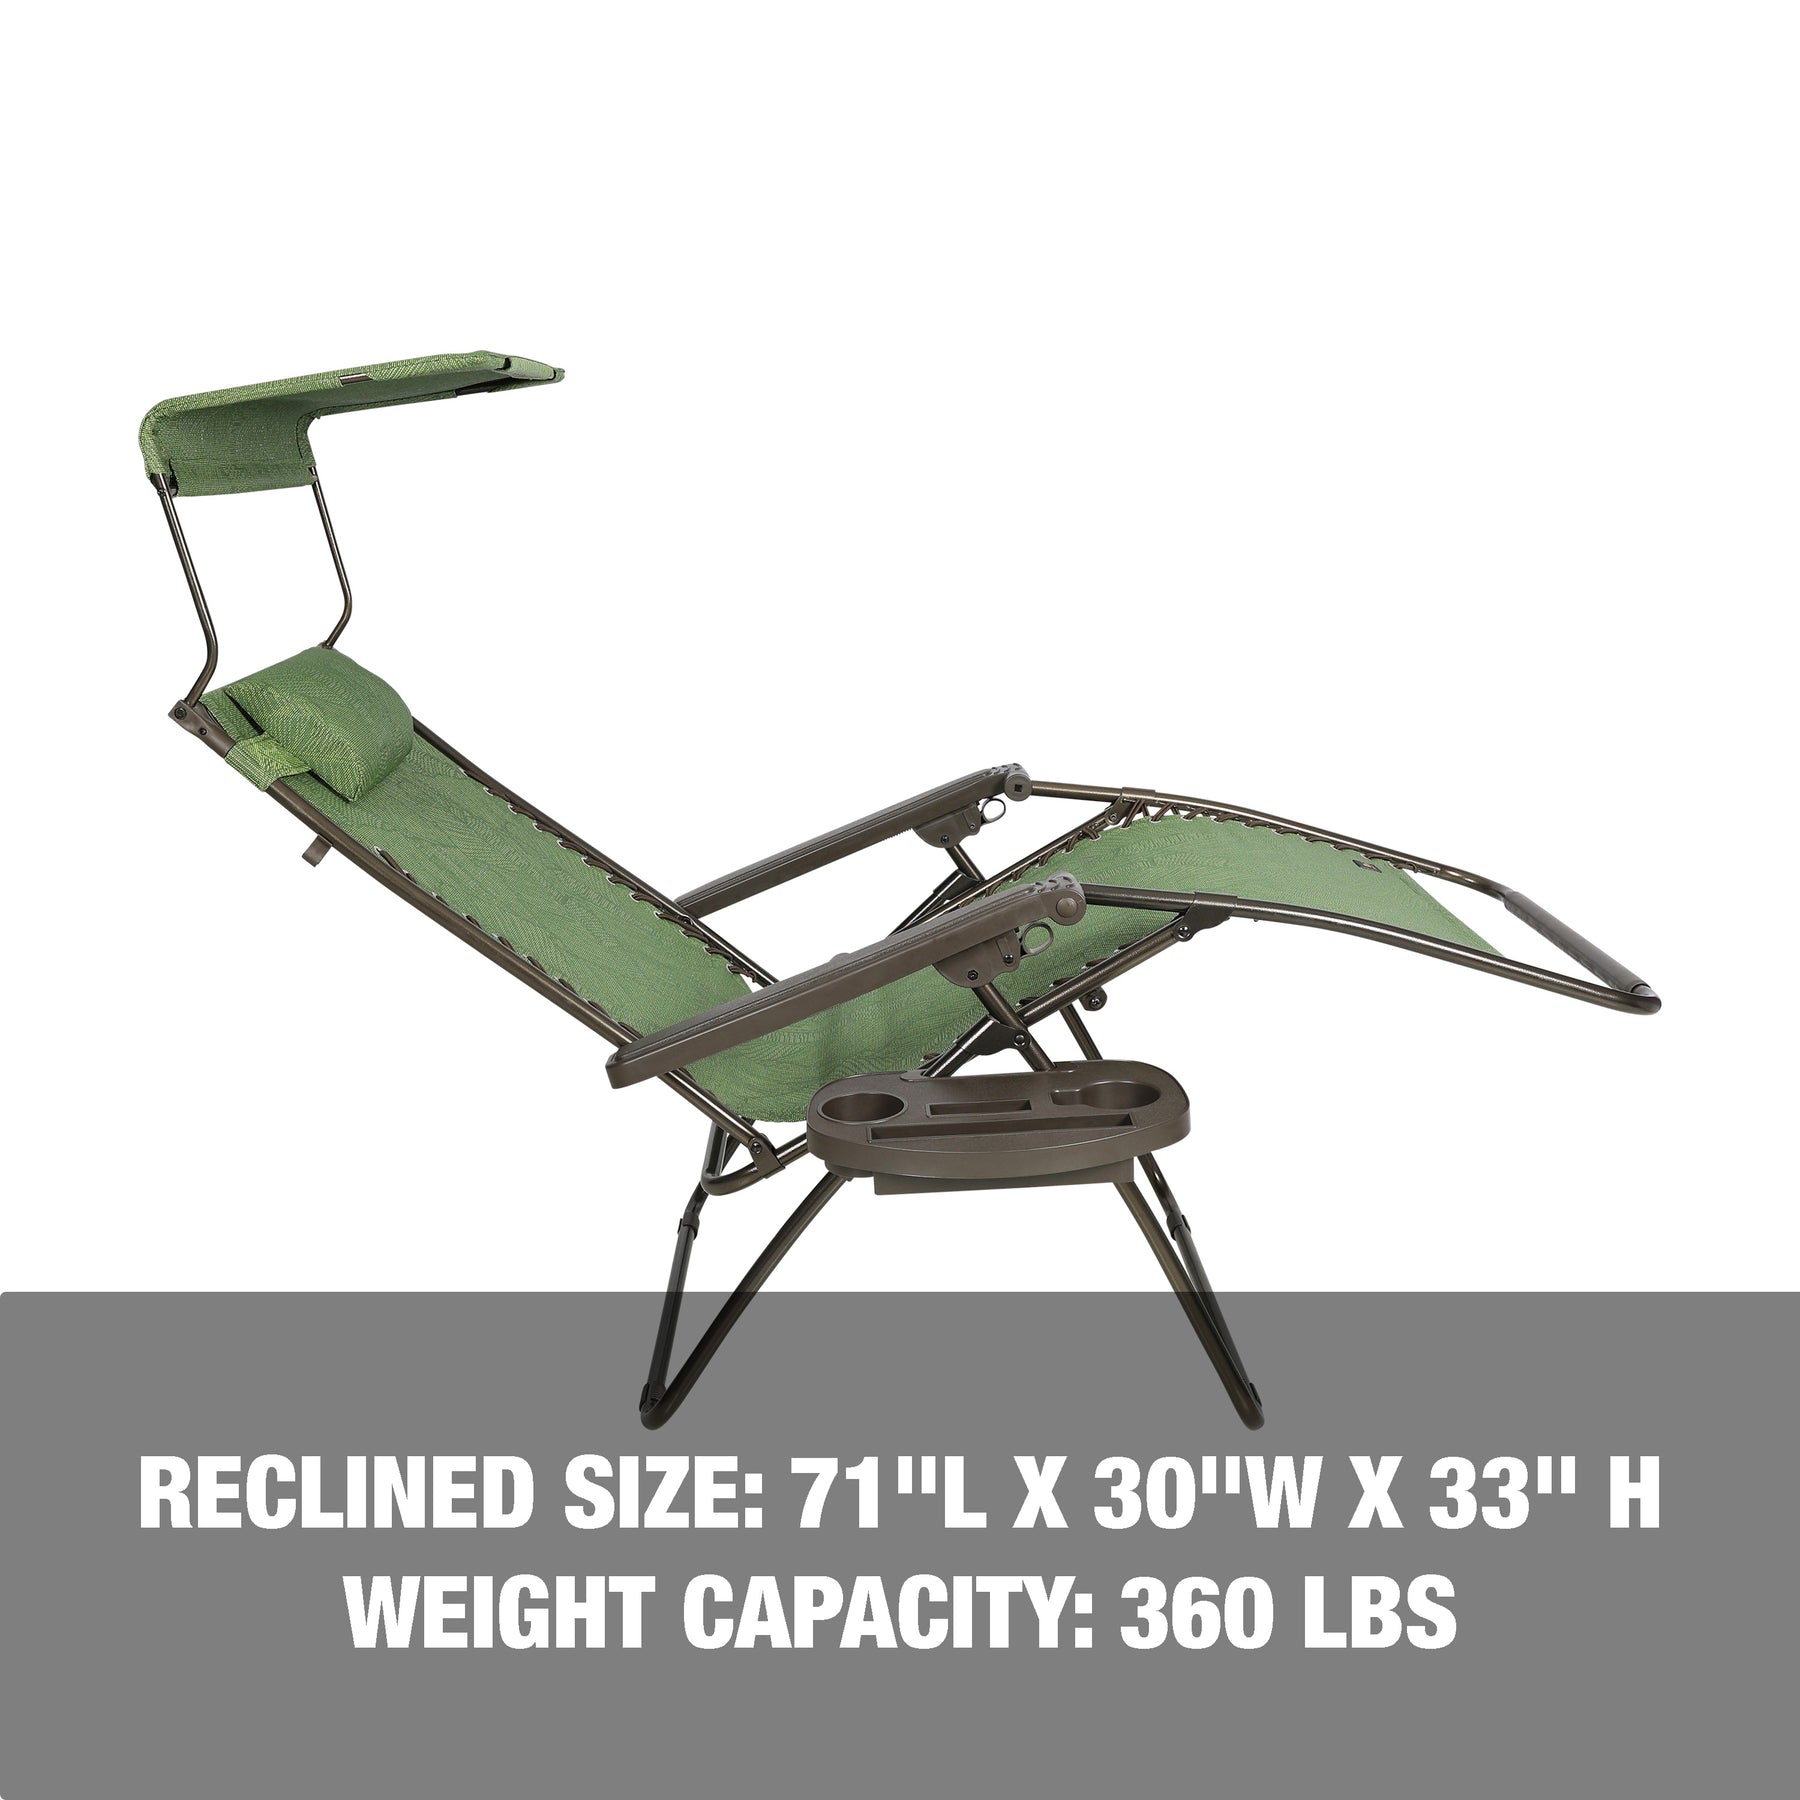 Reclined size: 71-inch length, 30-inch wide, and 33-inch height with a weight capacity of 360 pounds.